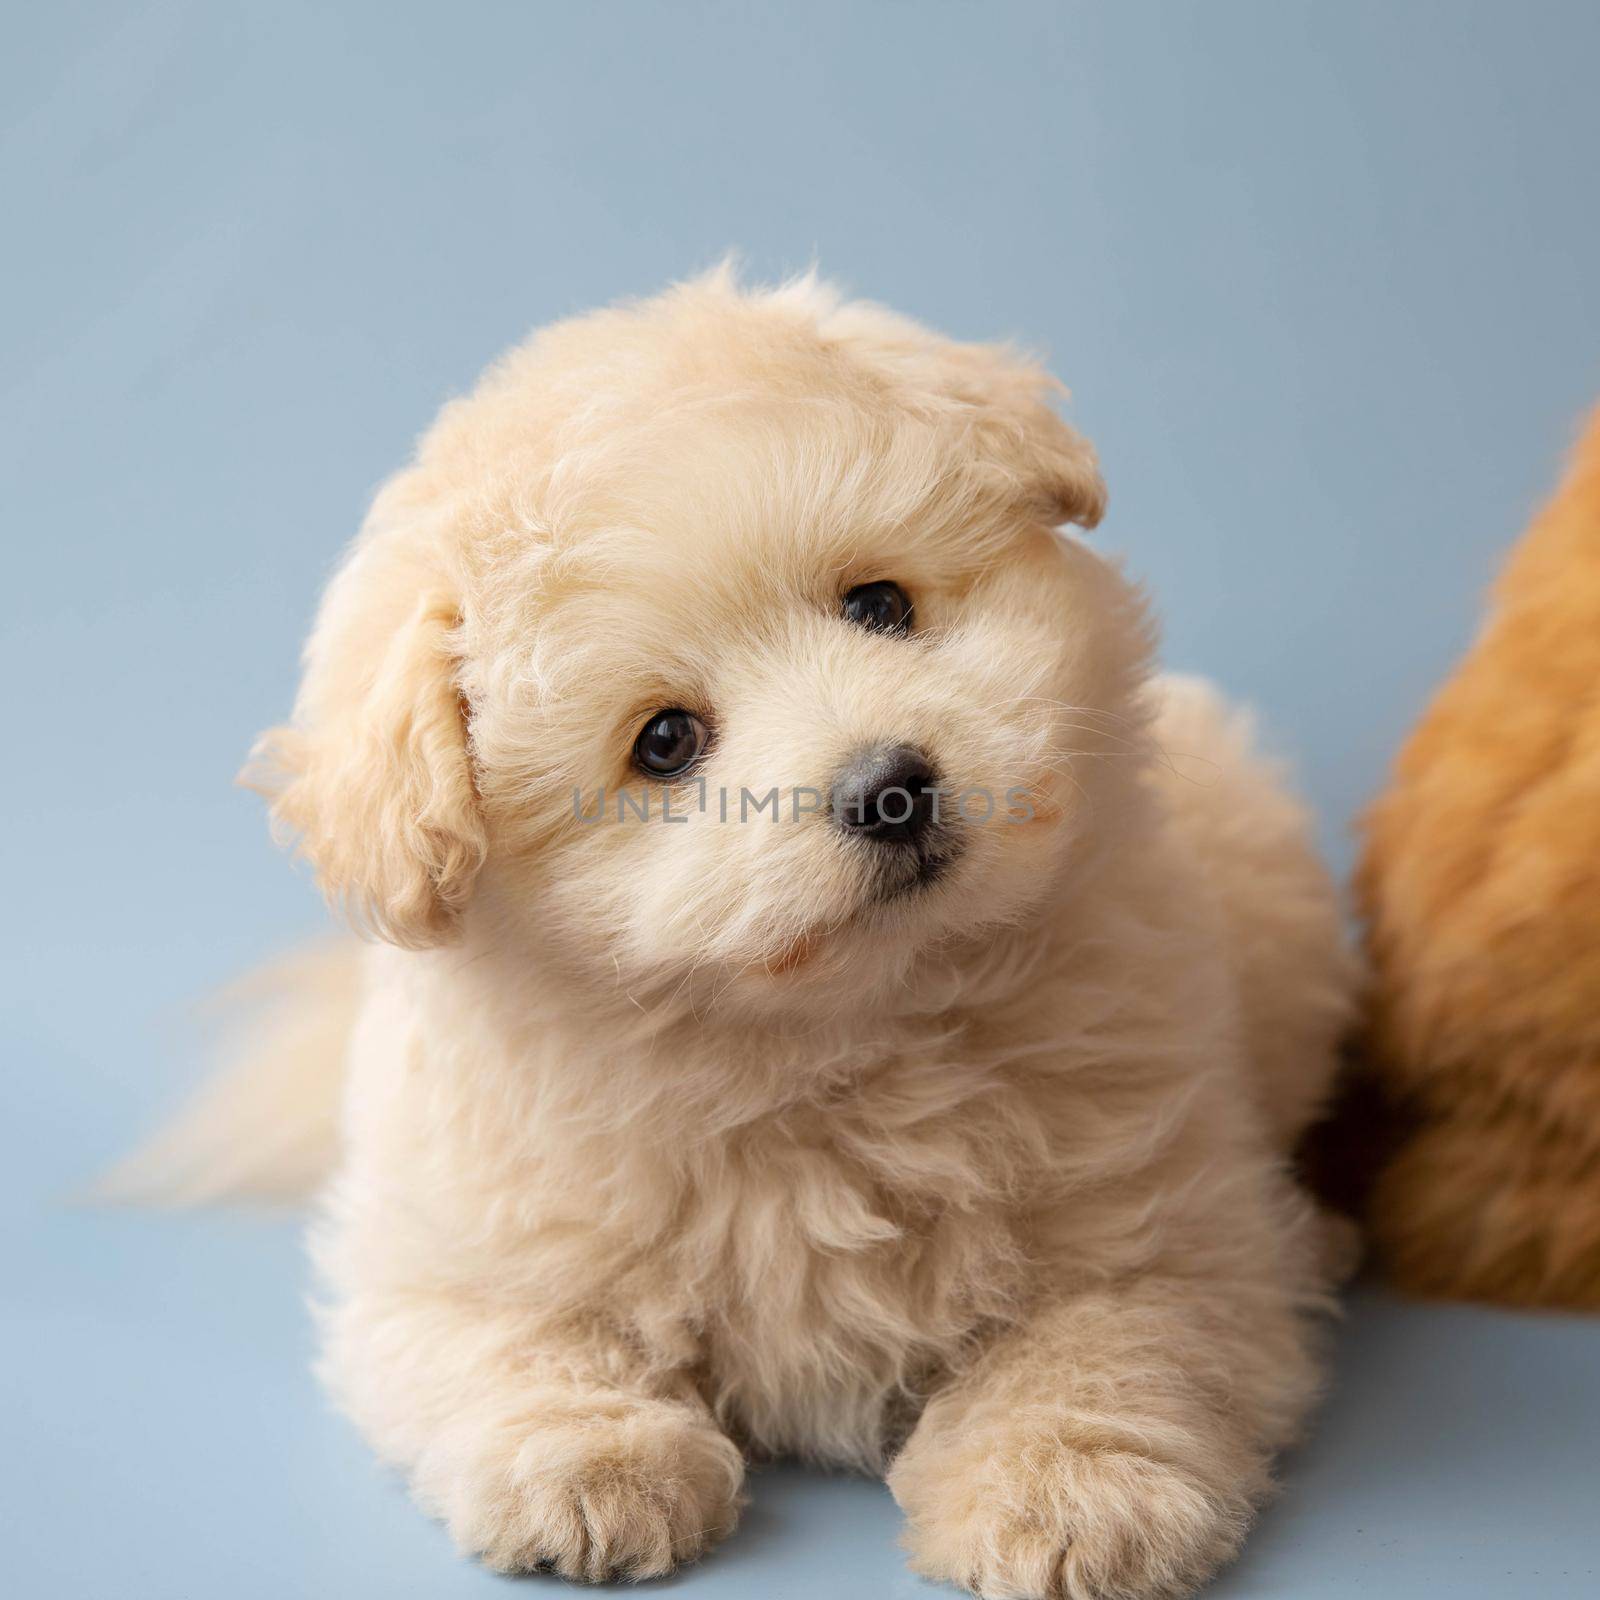 A small poodle puppy is lying on a blue background with its head tilted to the side.